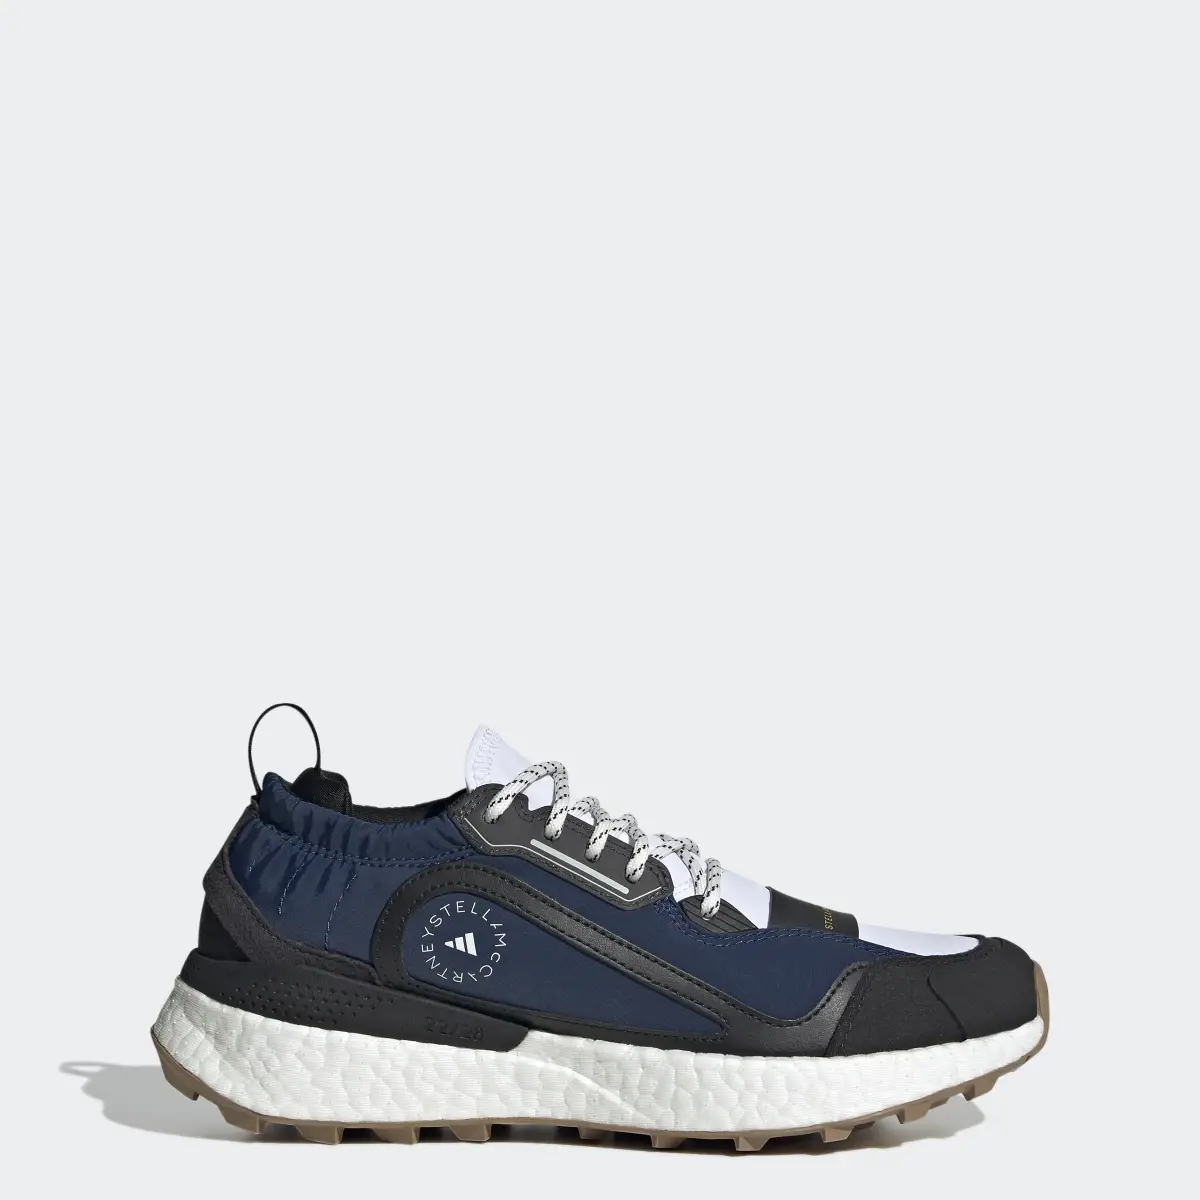 Adidas by Stella McCartney Outdoorboost 2.0 COLD.RDY Shoes. 1